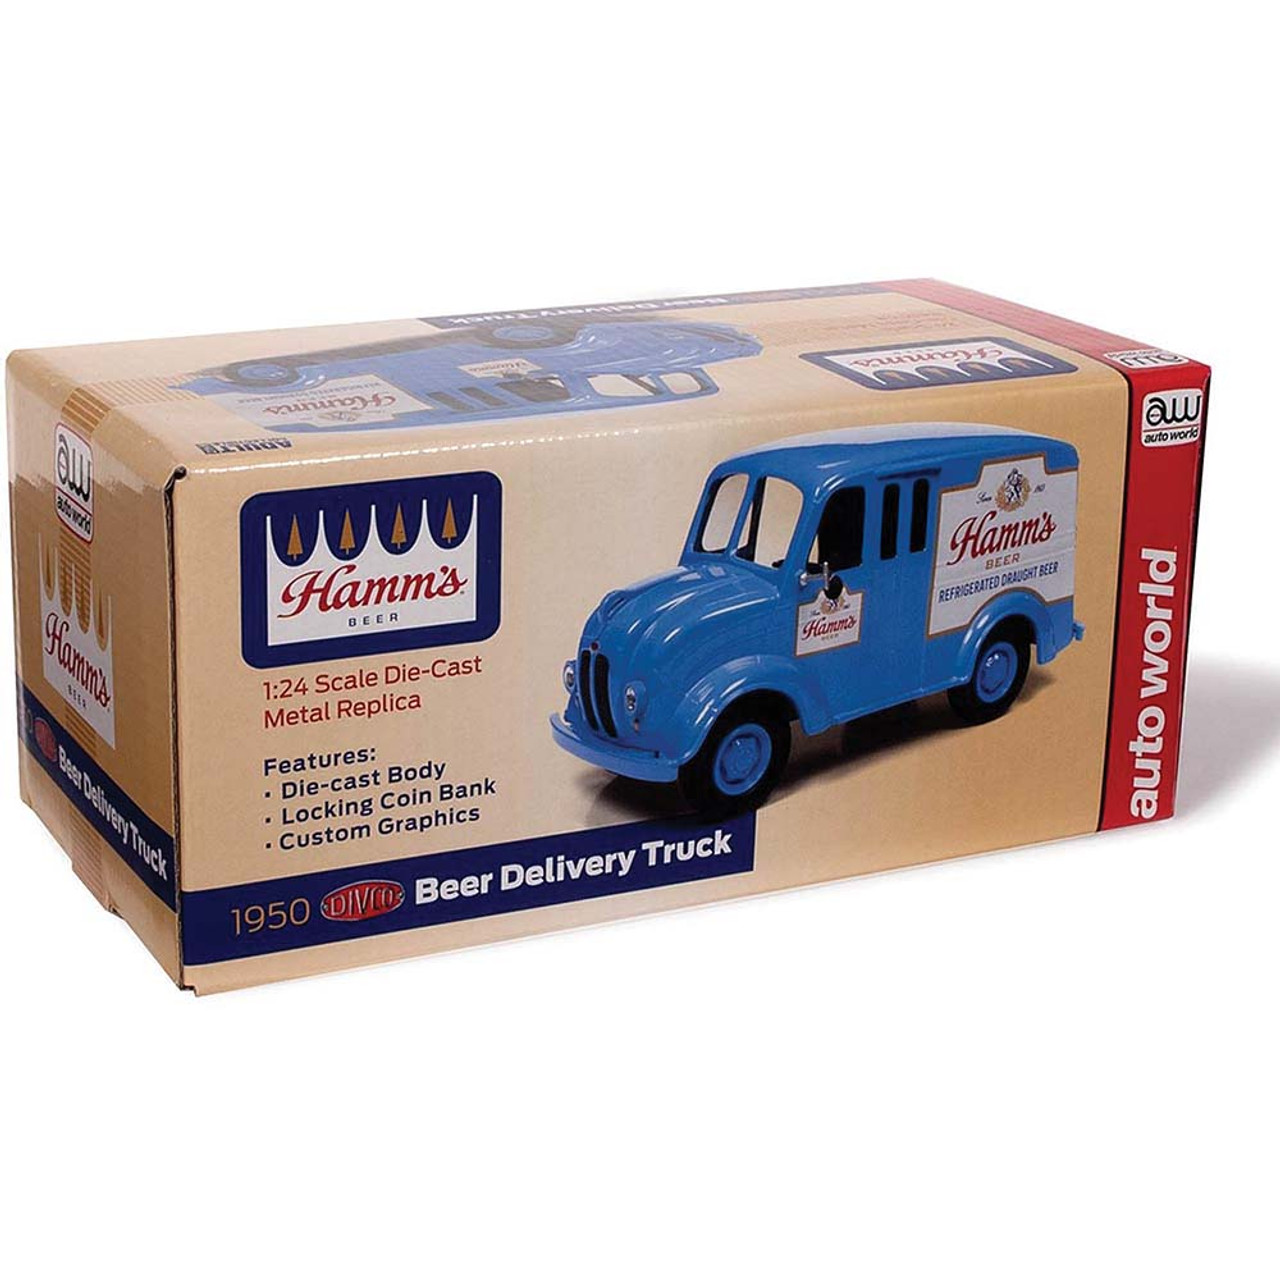 1950 Divco Delivery Truck World Light Hamms Beer | Blue Auto